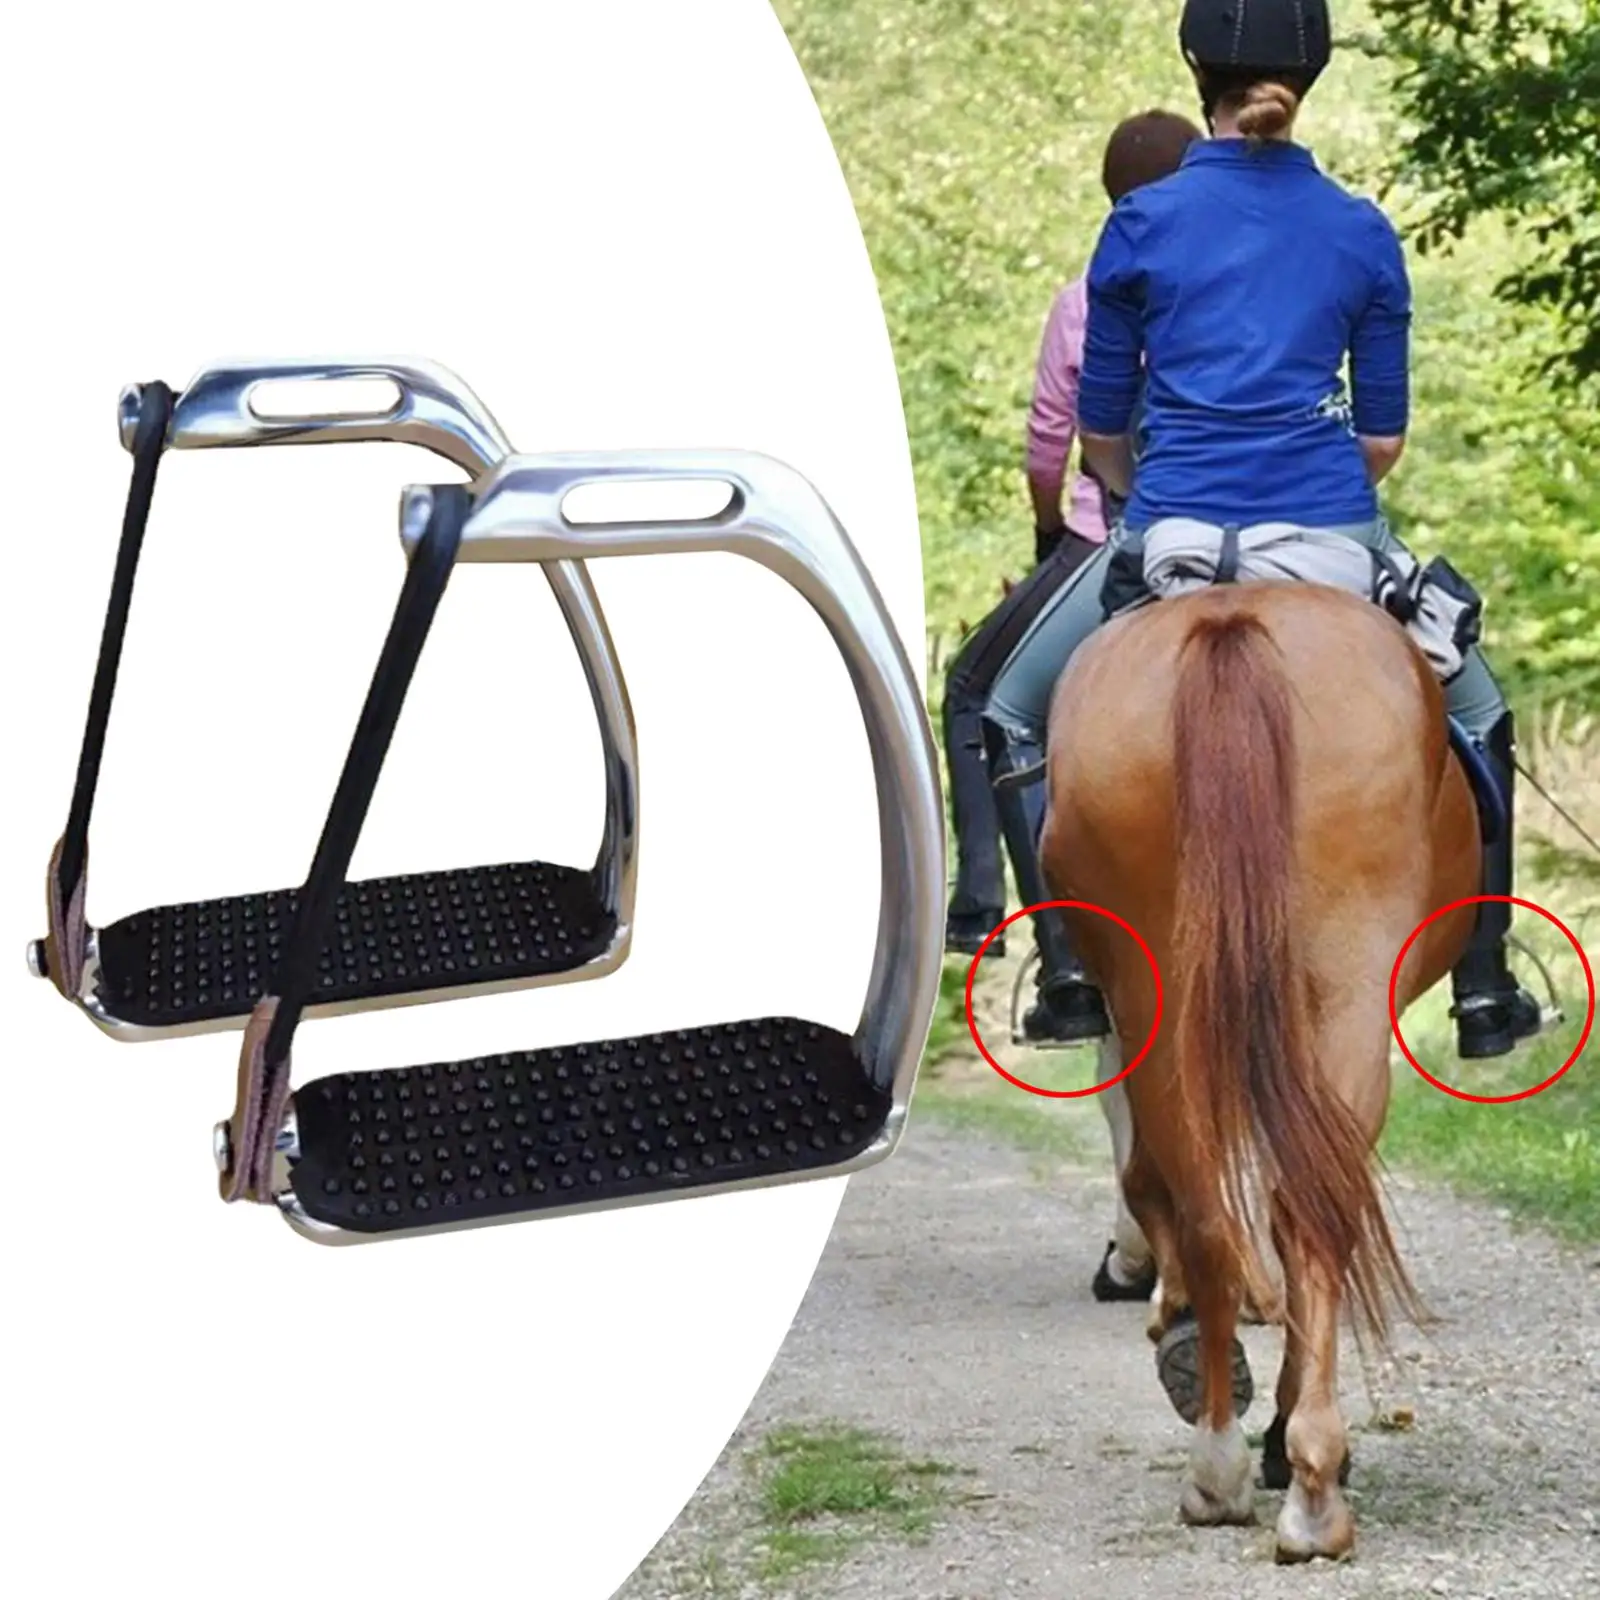 2Pcs Horse Pedal Training Tool with Rubber Pad Durable Non Slip Horse Riding Stirrups for Equestrian Sports Outdoor Equipment